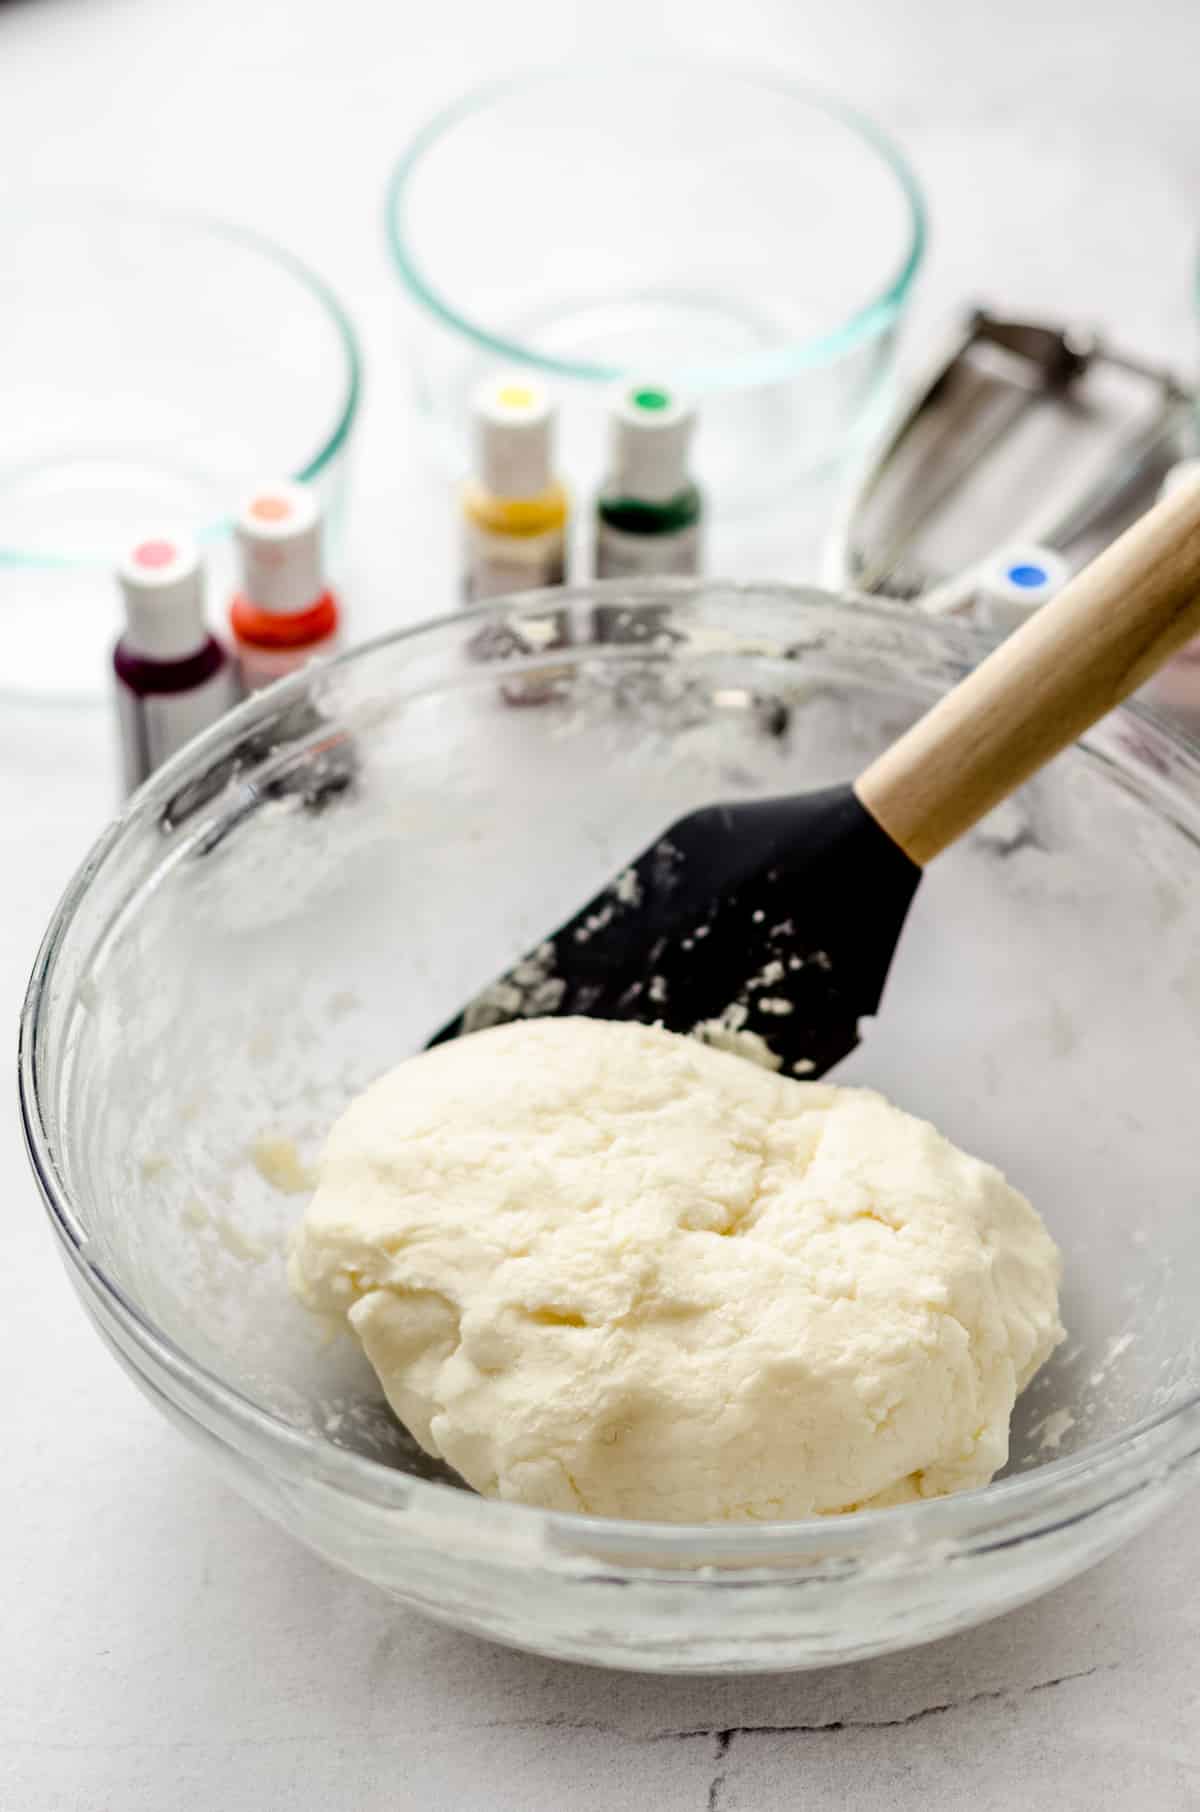 A cream cheese dough that has been formed into a solid mass.